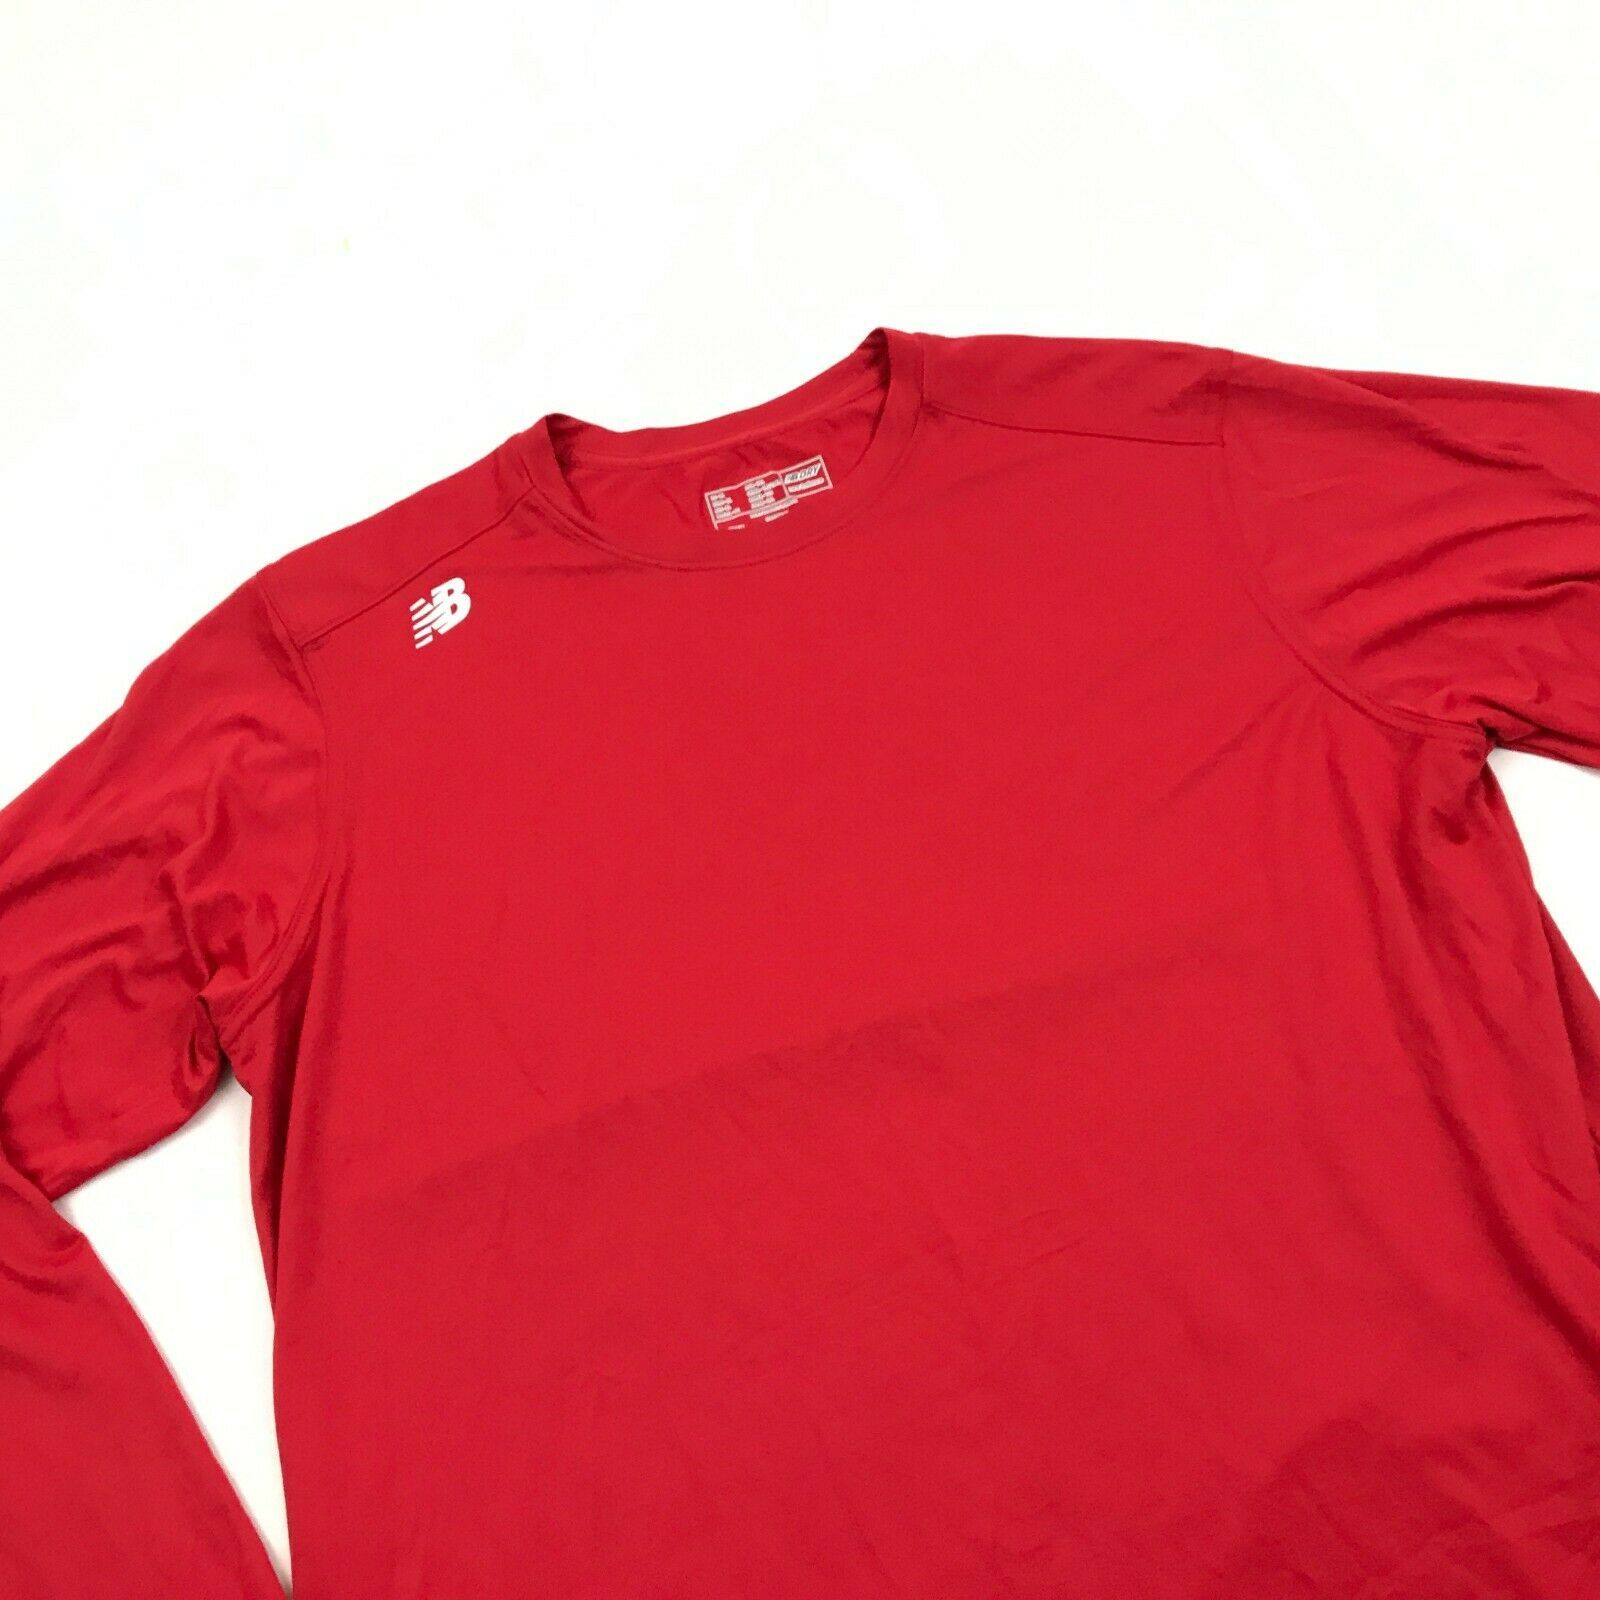 New Balance NB Dry Fit Shirt Men Size XL Extra Large Red Long Sleeve ...